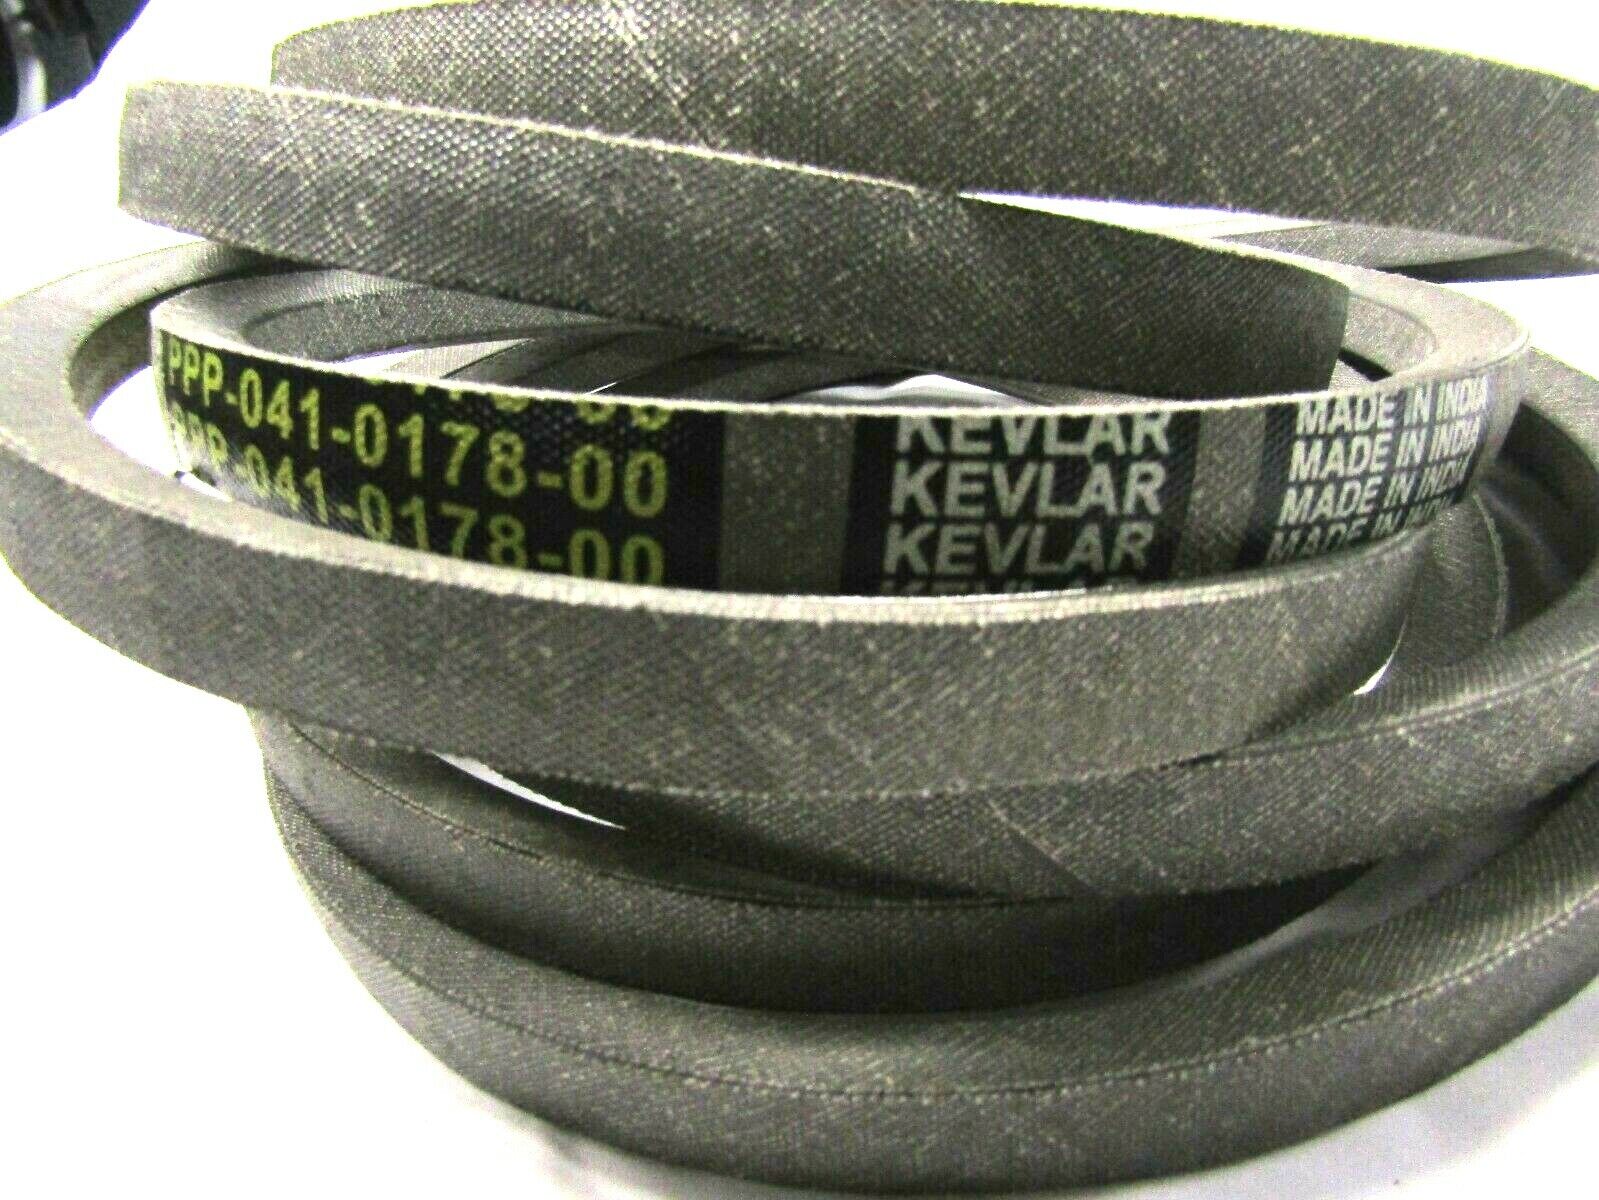 Made with Kevlar belt  BAD BOY 041-0178-00 041017800 OUTLAW EXTREME XP 61" Cut